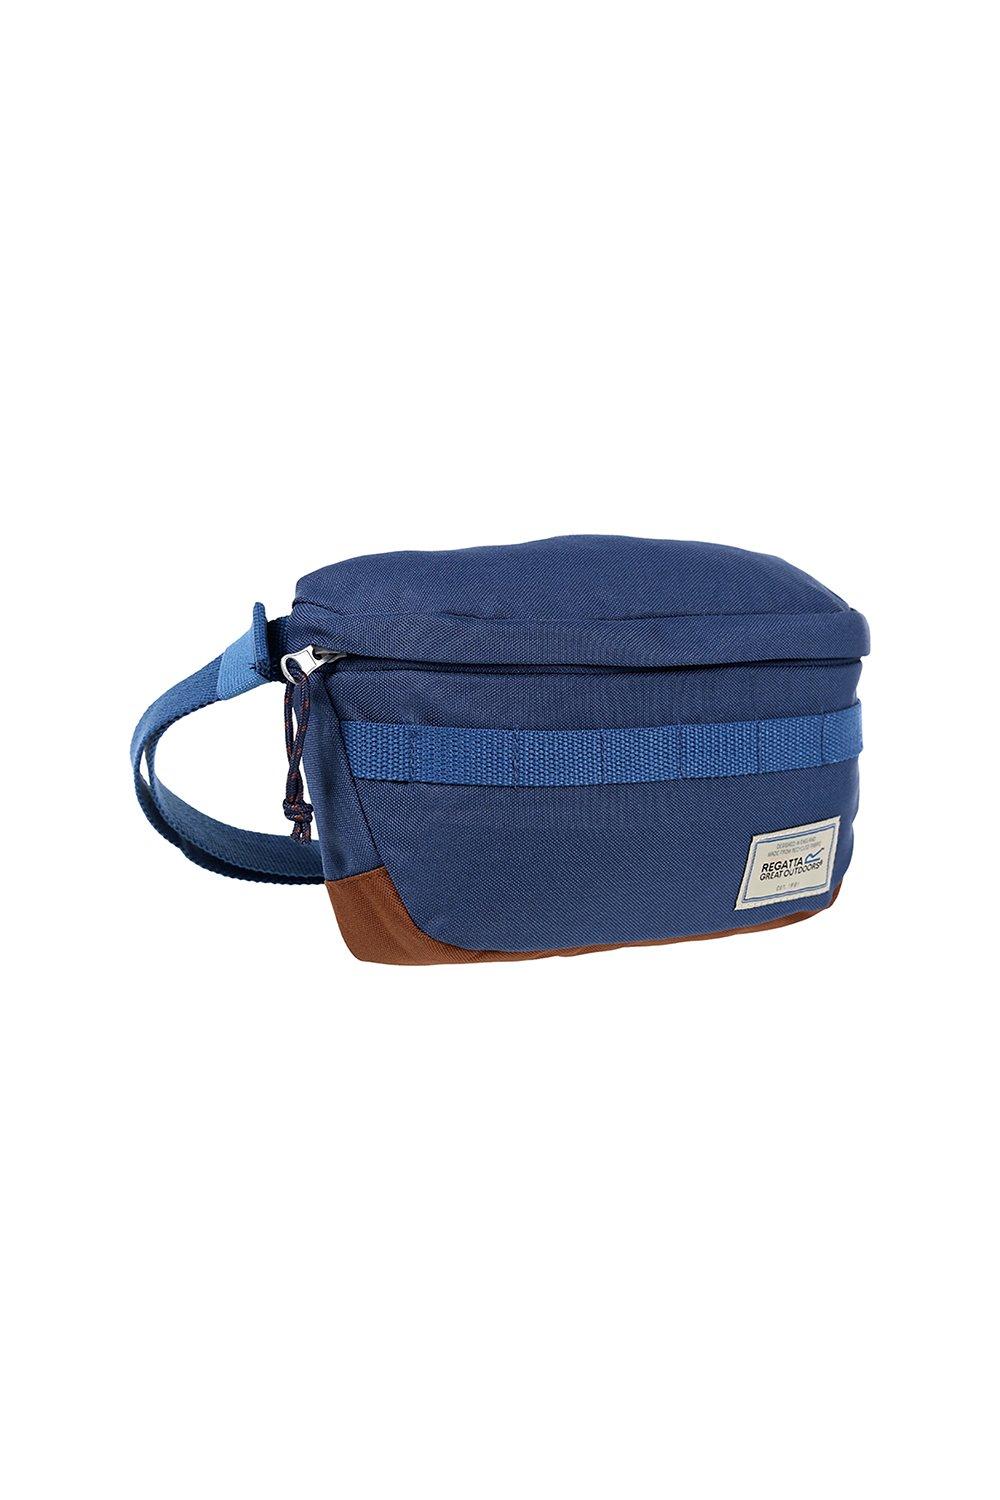 'Stamford' Recycled Travel Waist Pack